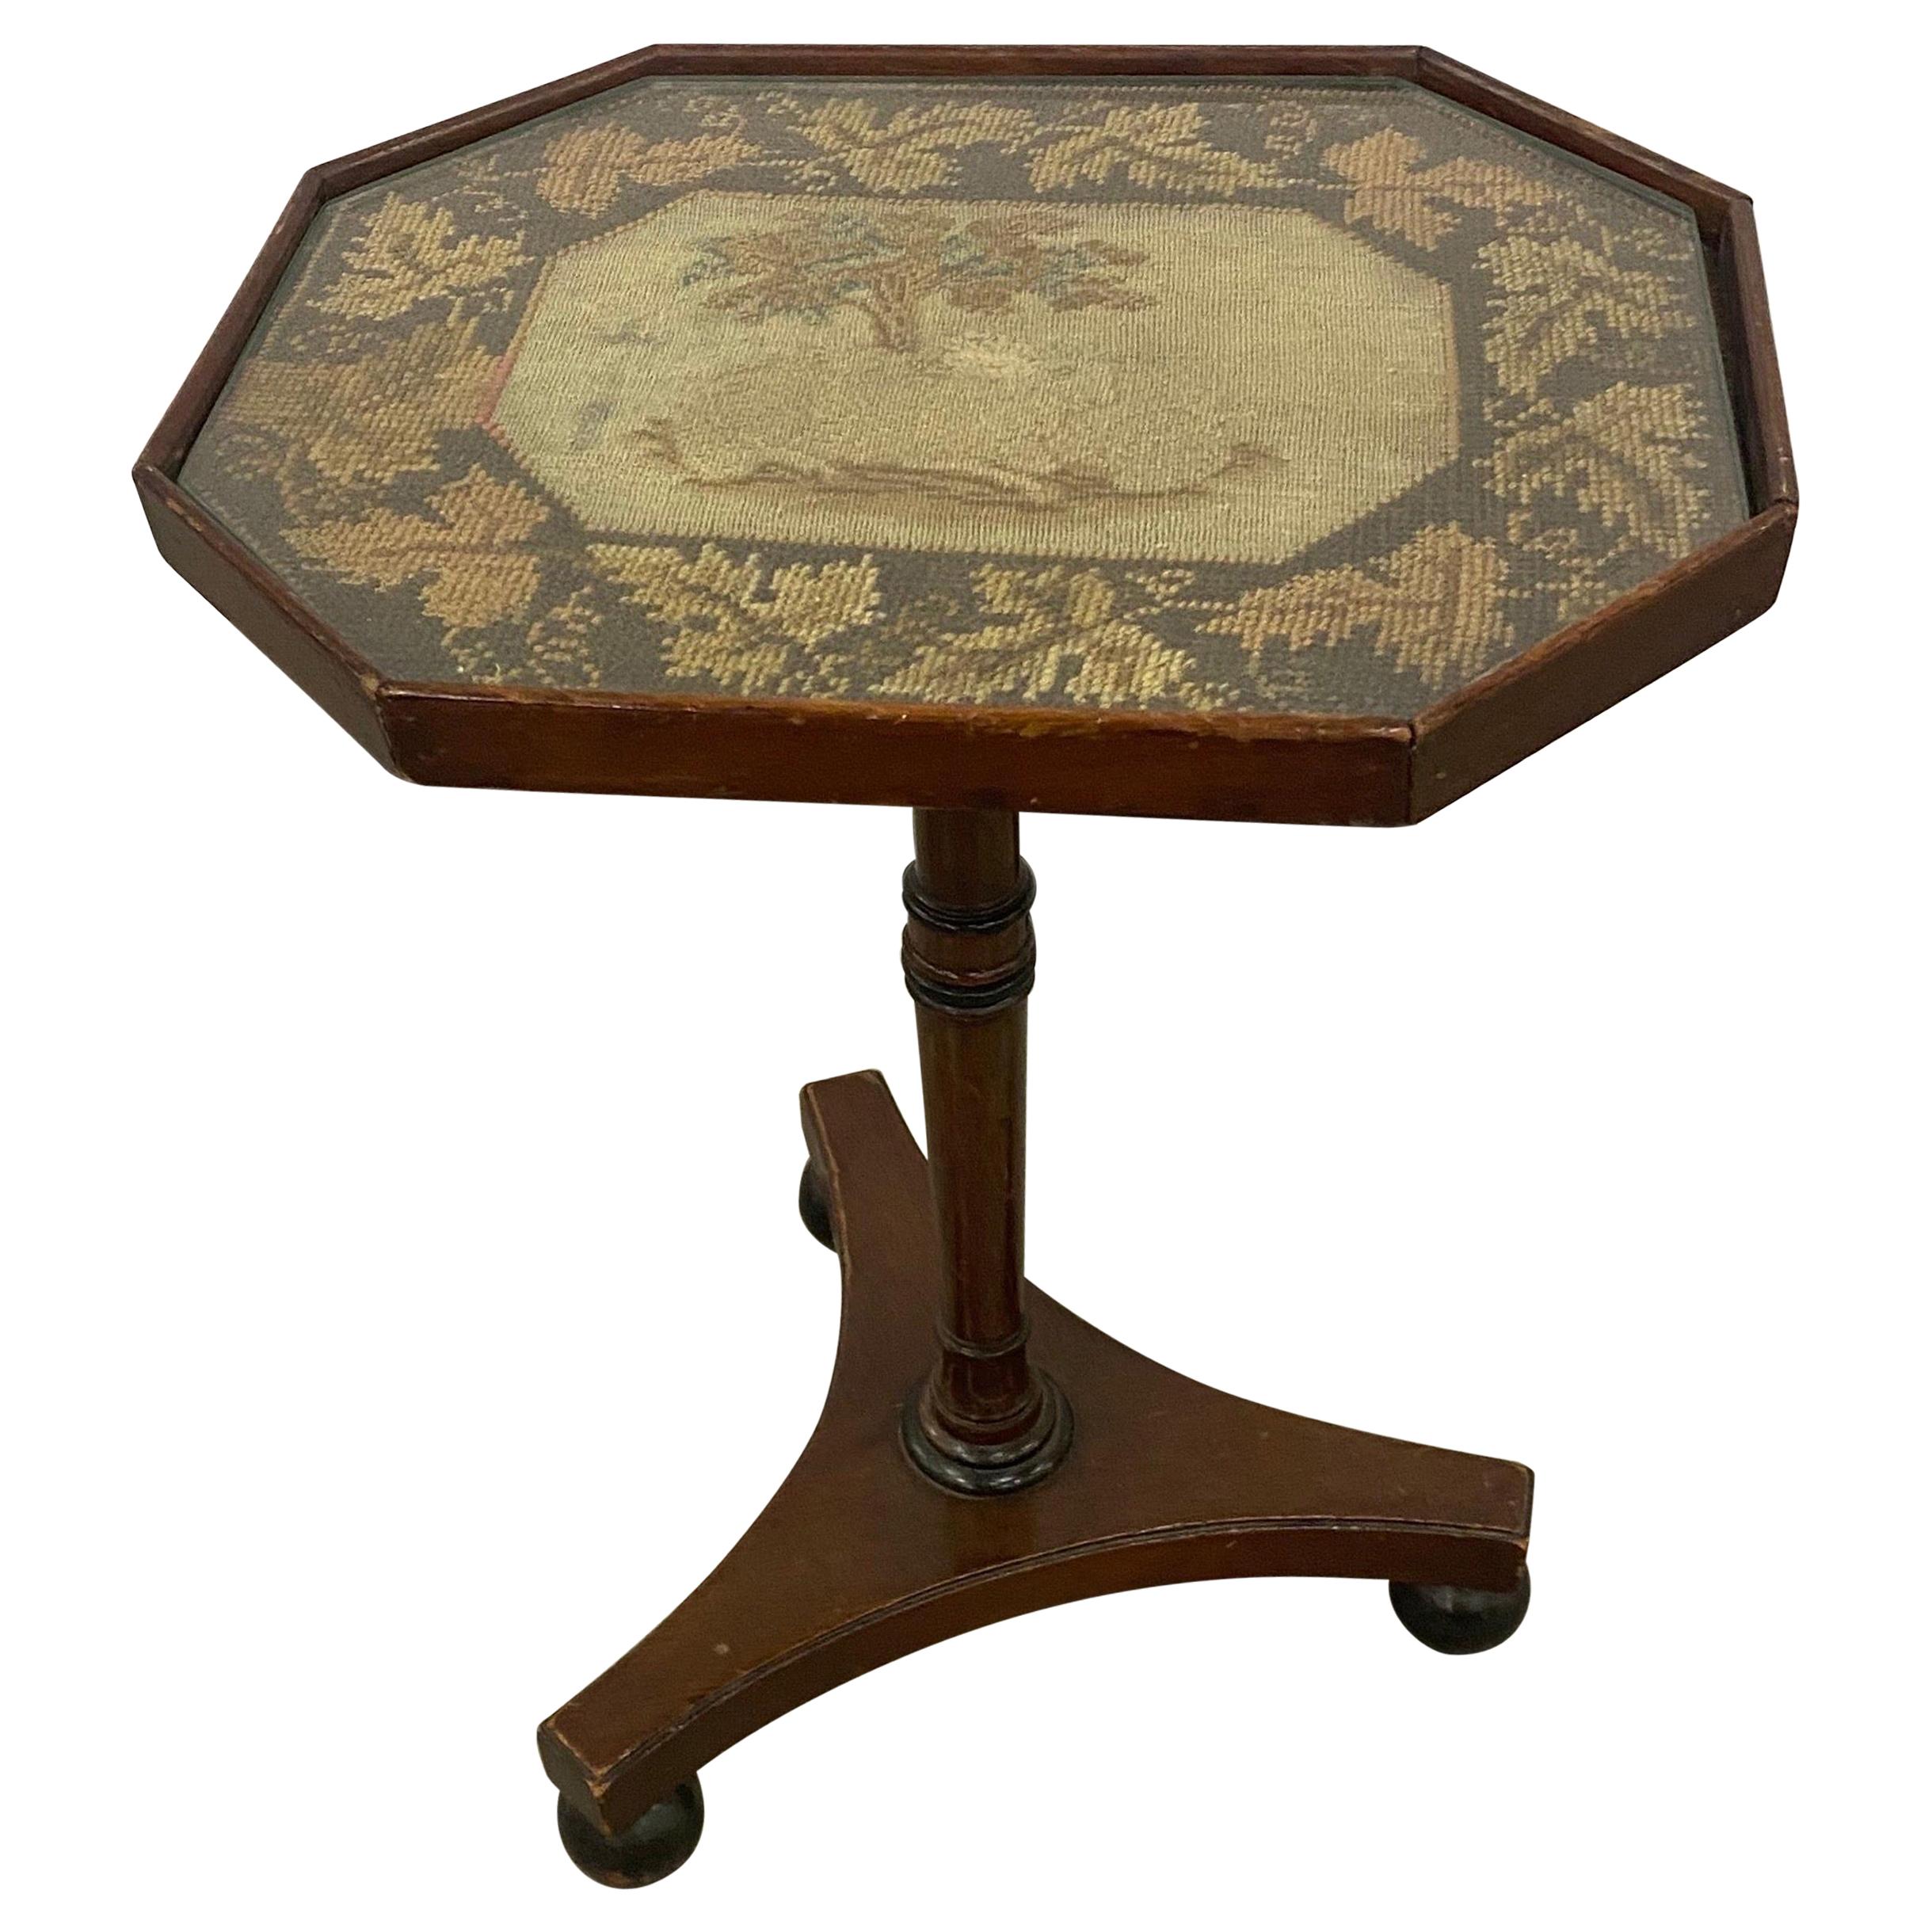 19th Century Regency Embroidered Top Mahogany Side Table